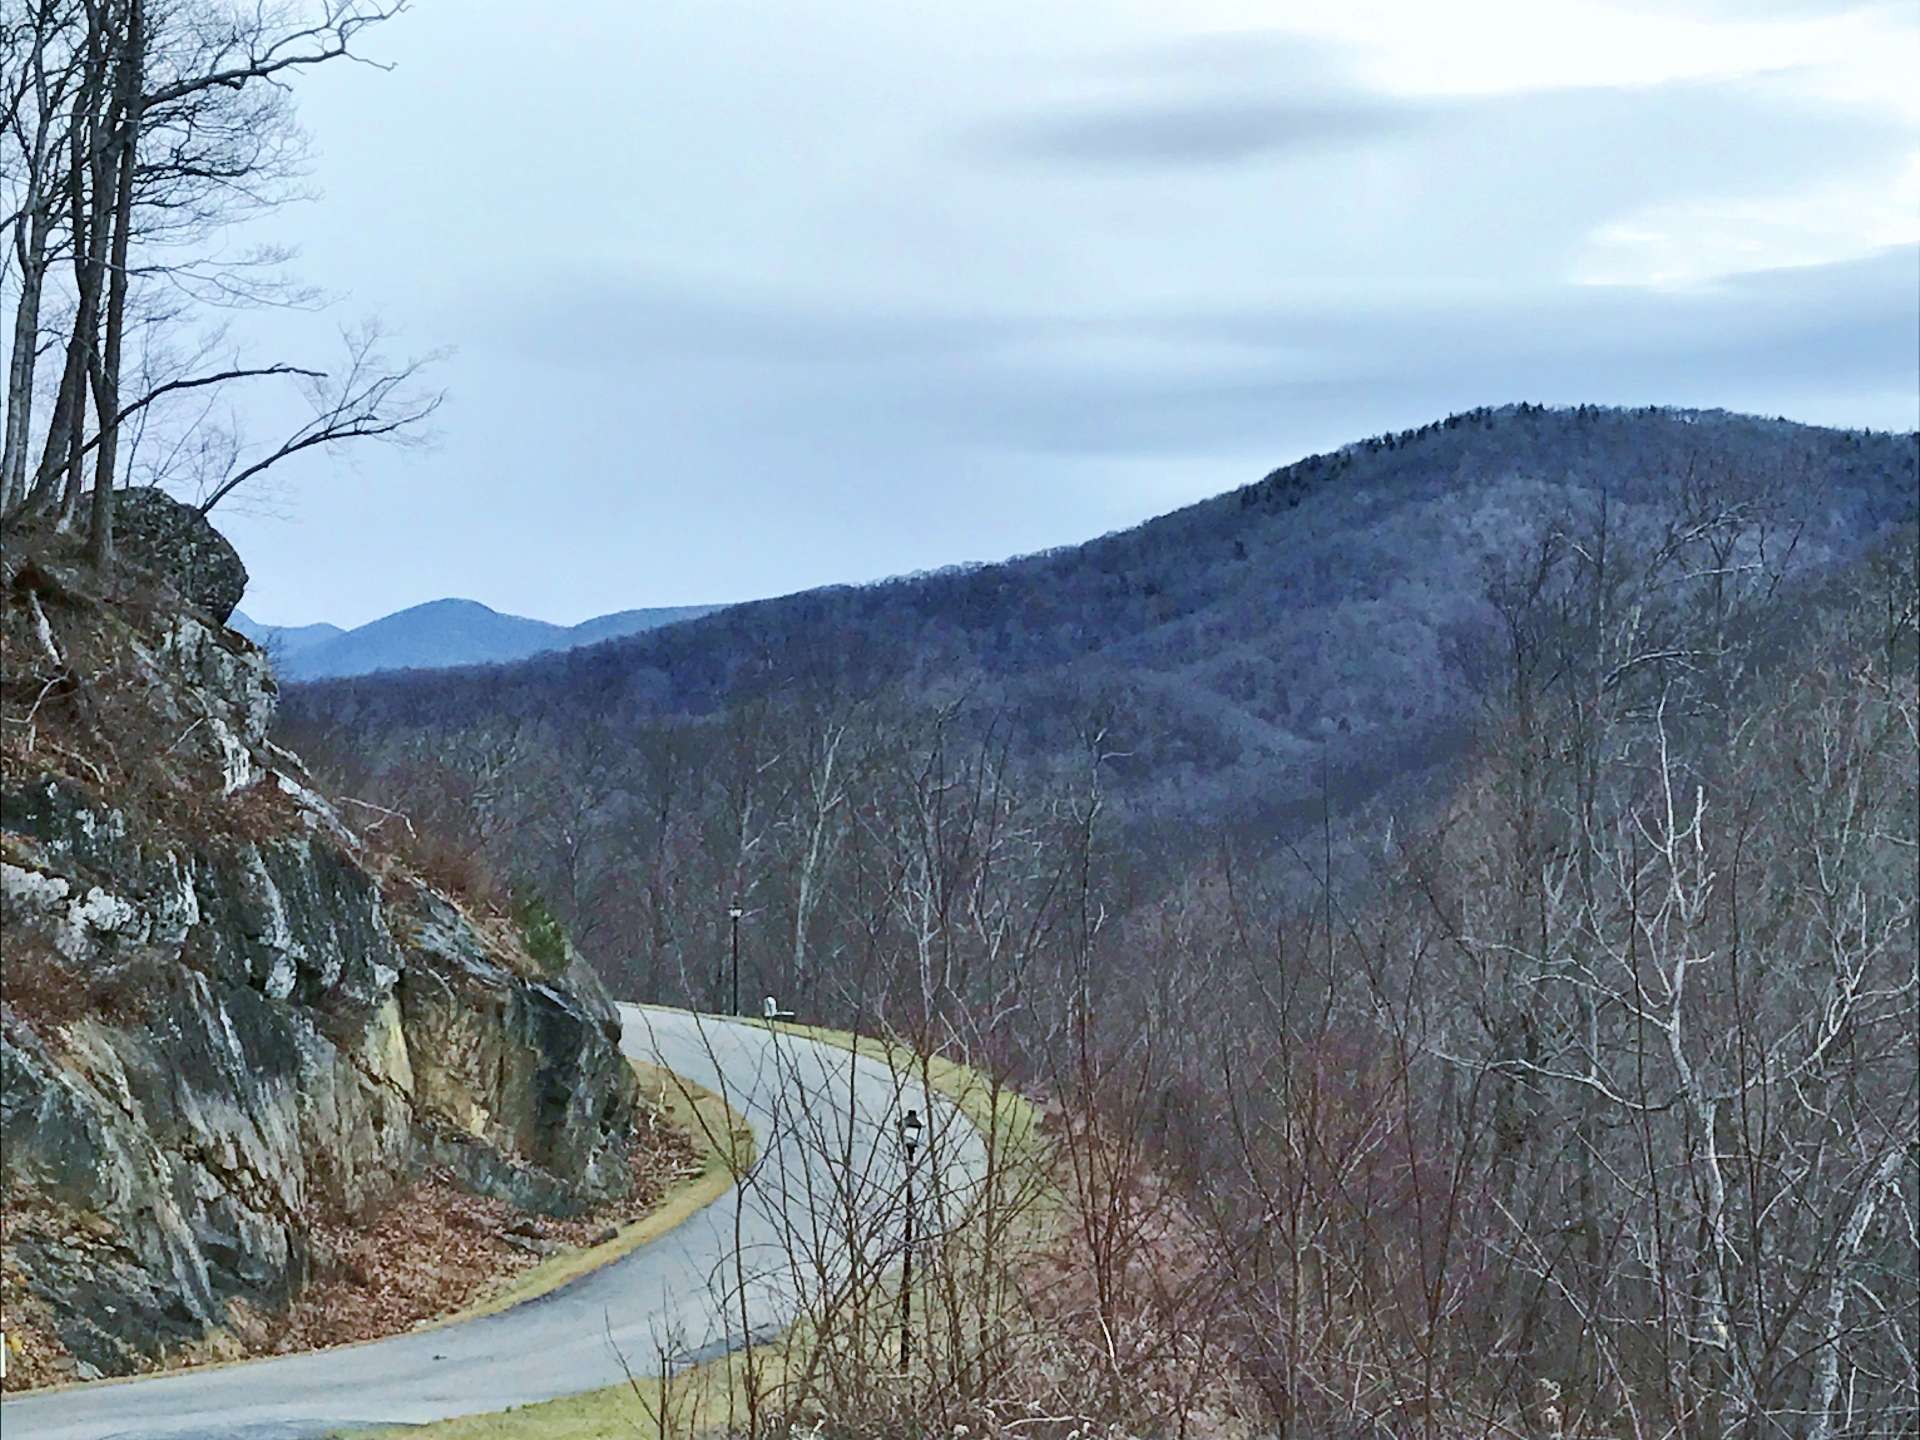 Enjoy the panoramic beauty of all four seasons from this perfect Granite Ridge homesite, priced well and easily accessible. The location is close to Jefferson, West Jefferson, Boone, Blowing Rock and the Blue Ridge Parkway in the NC High Country. Lot 39 of Granite Ridge is offered at only $35,000. G241